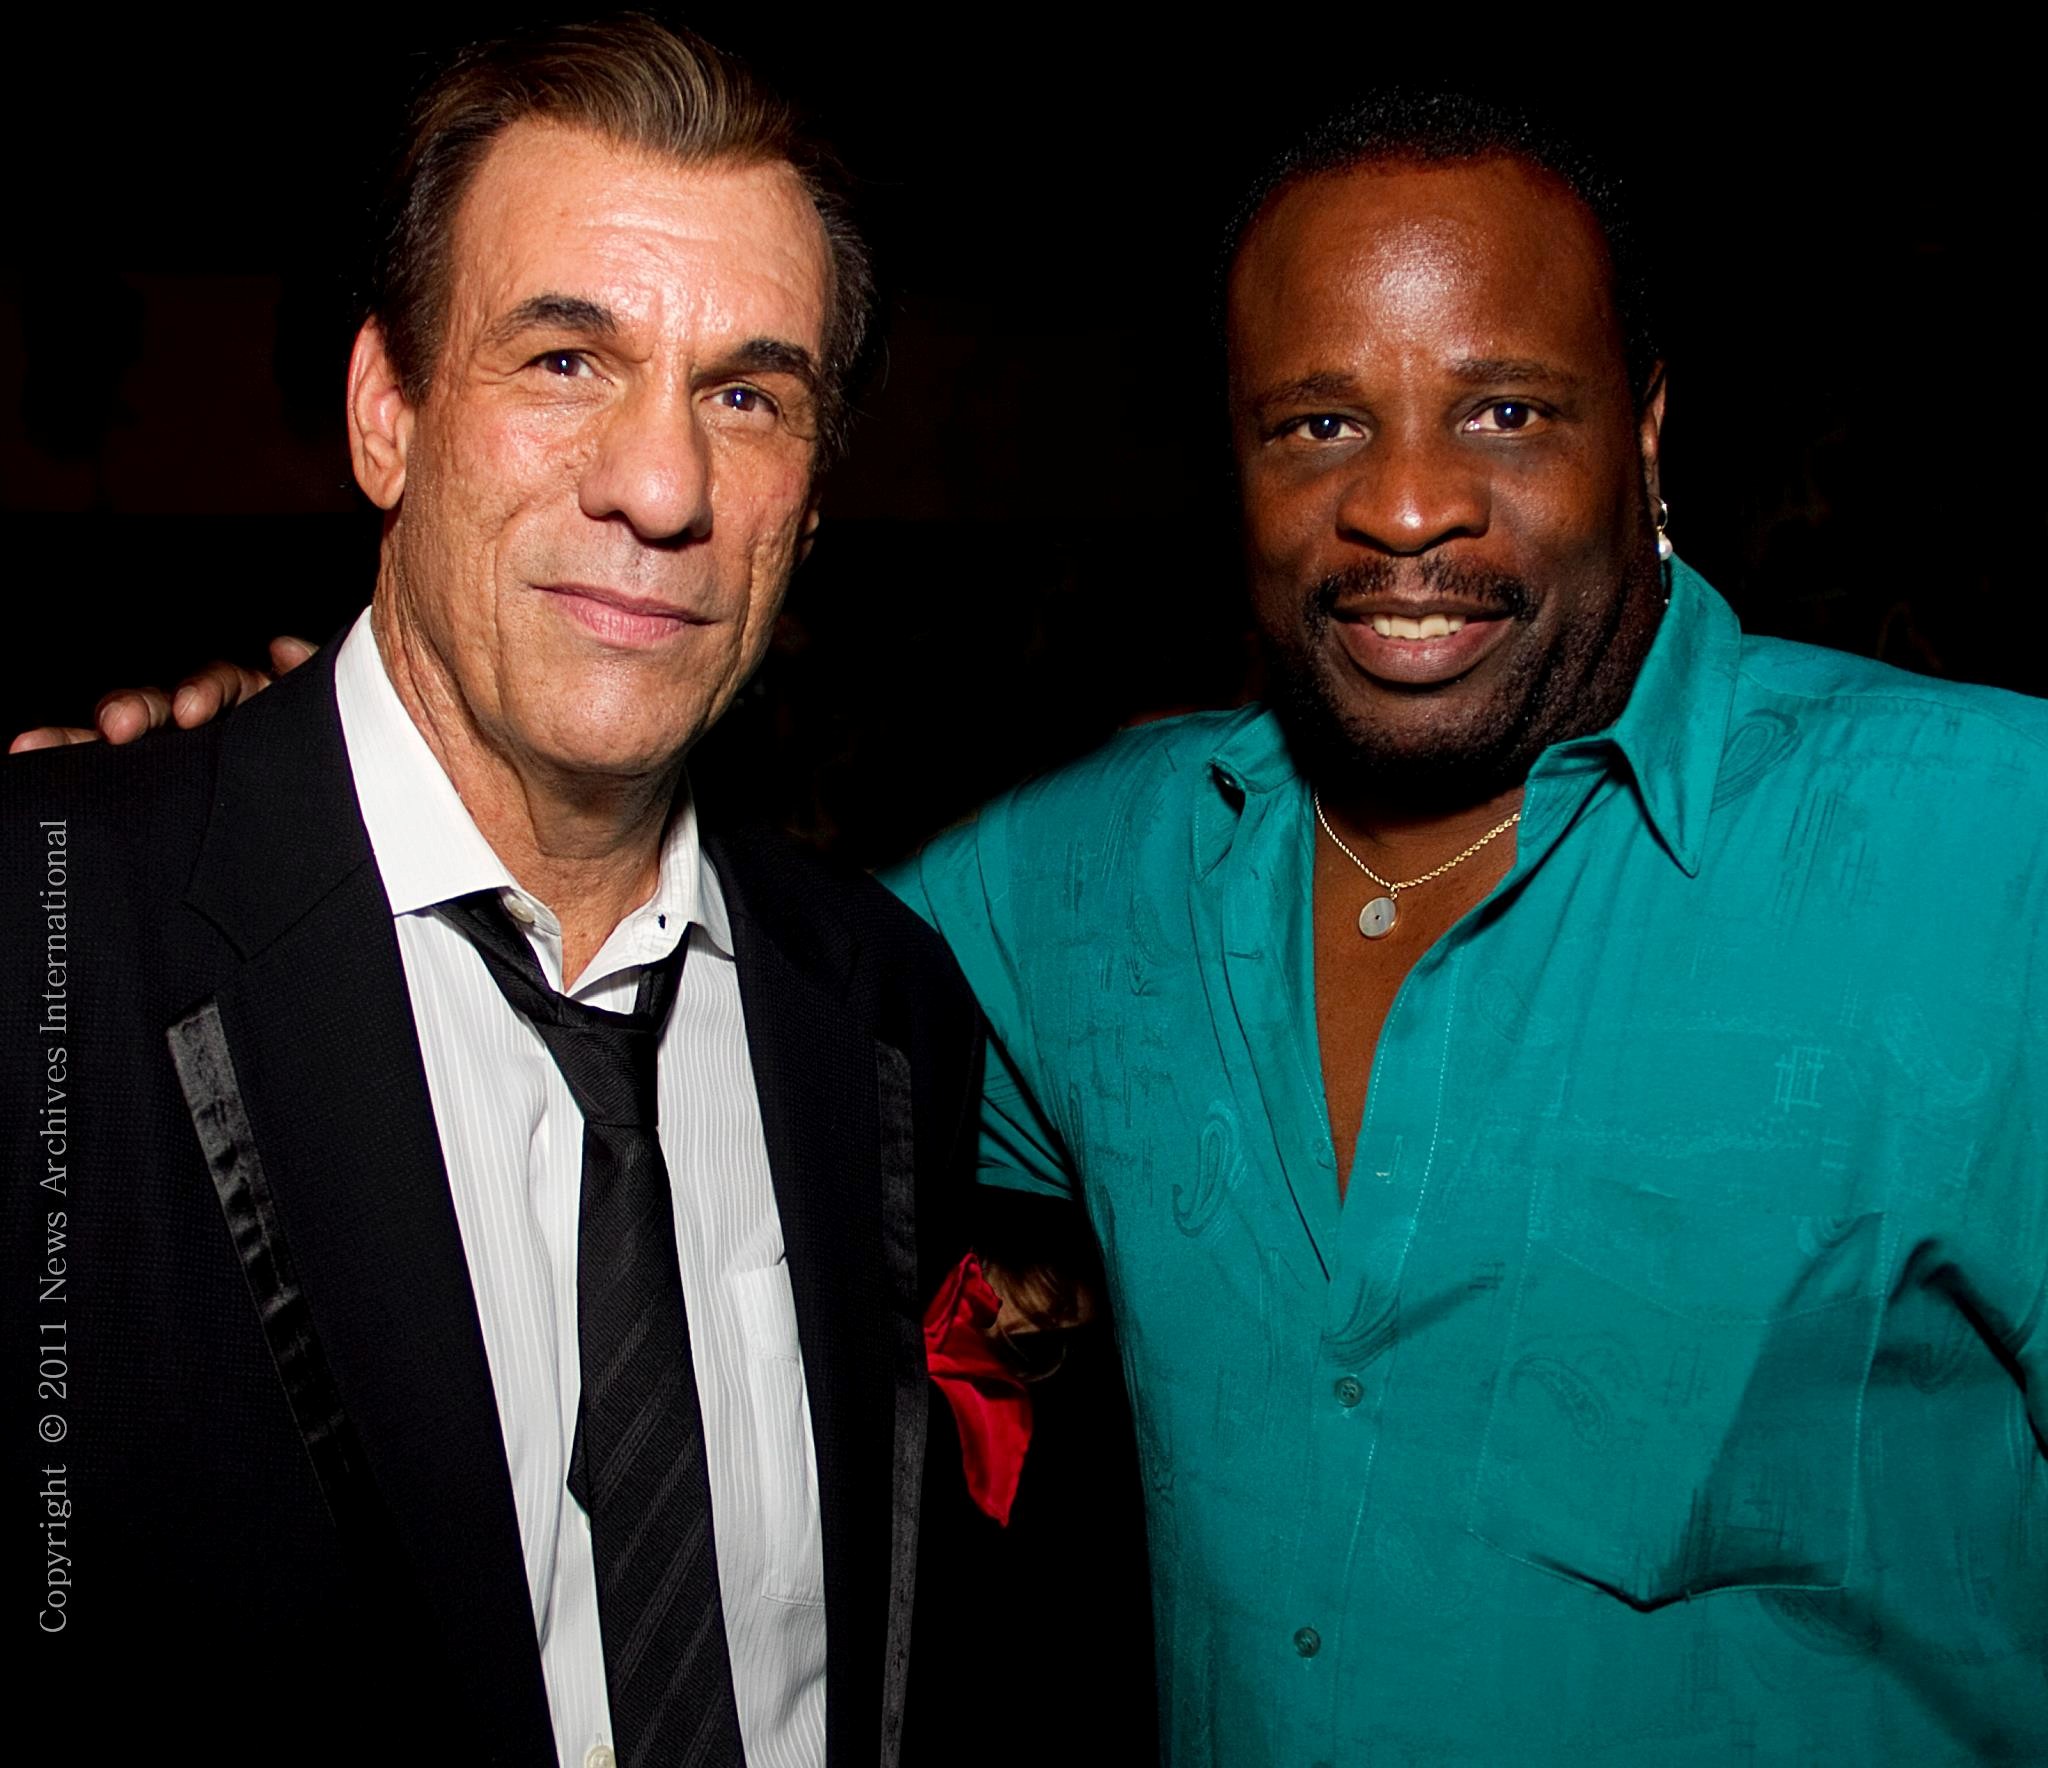 On September 20, 2011, actors Robert Davi and Grand L. Bush reunited after nearly 20 years.